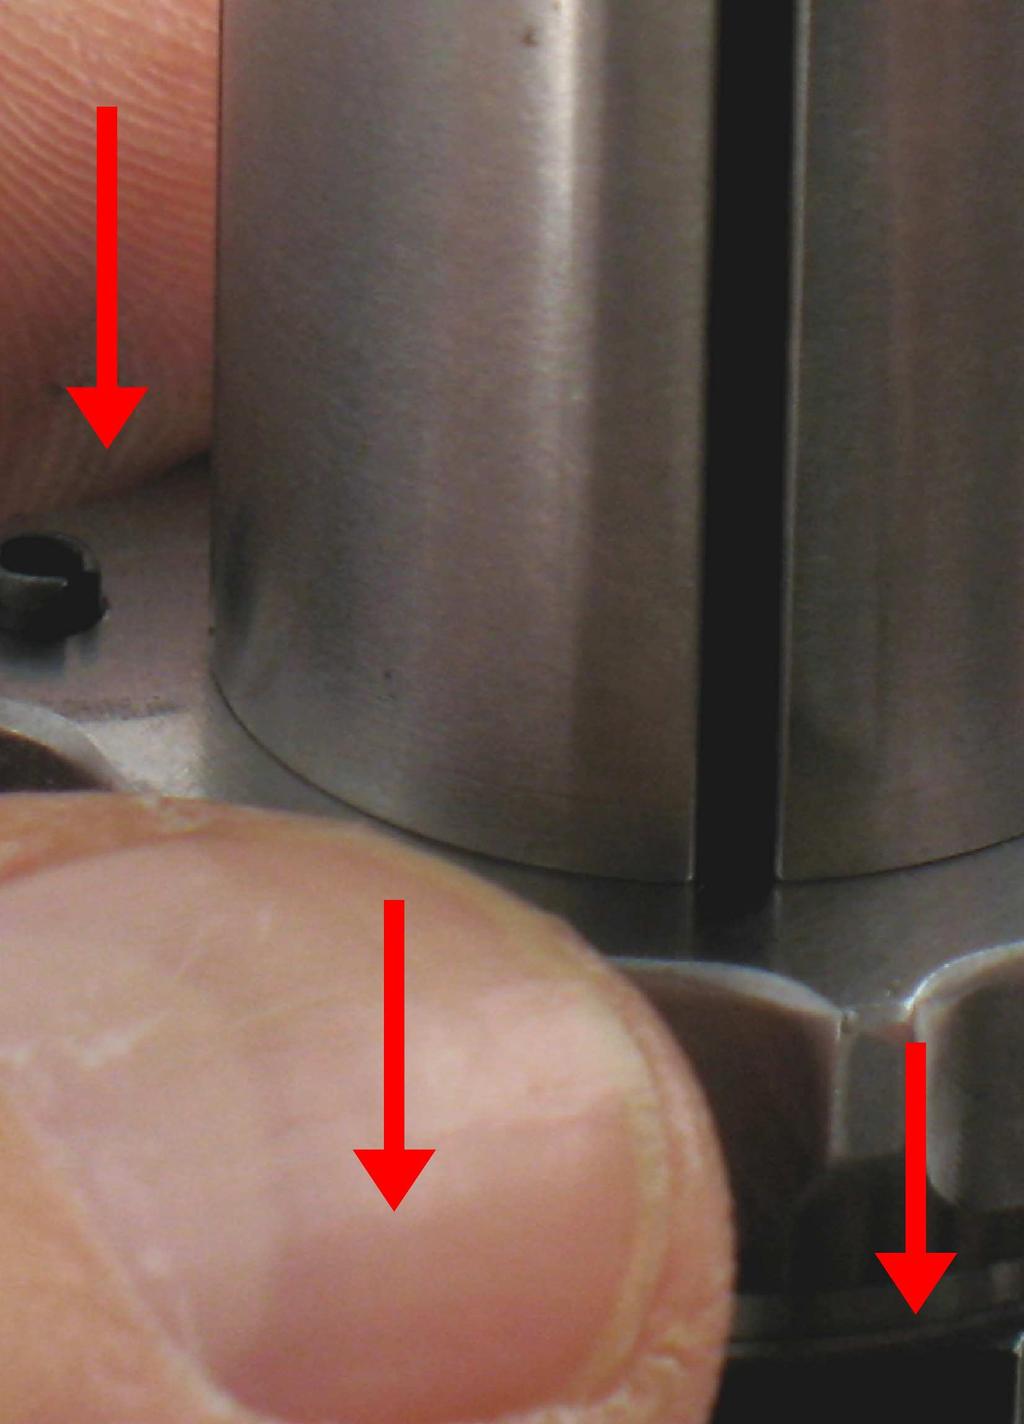 Check the clearance between the rotor and plate. Use a.001" (~0.03 mm) thick feeler gauge.